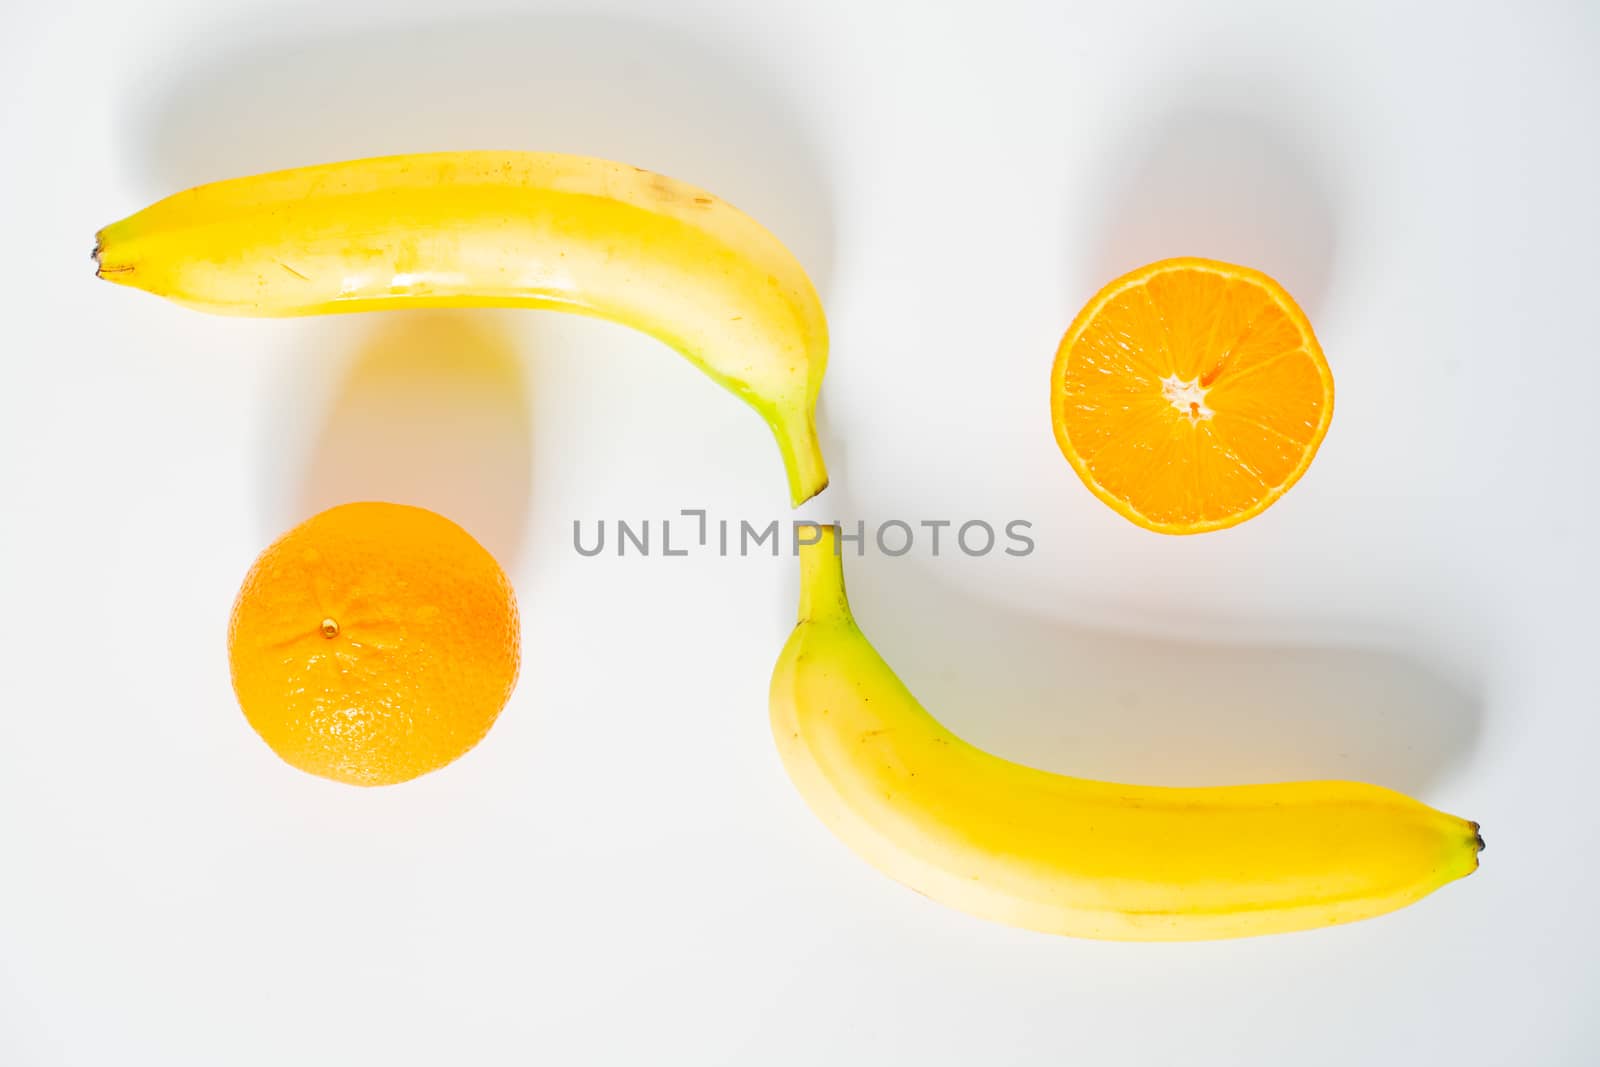 Two oranges and two bananas against a plain white background